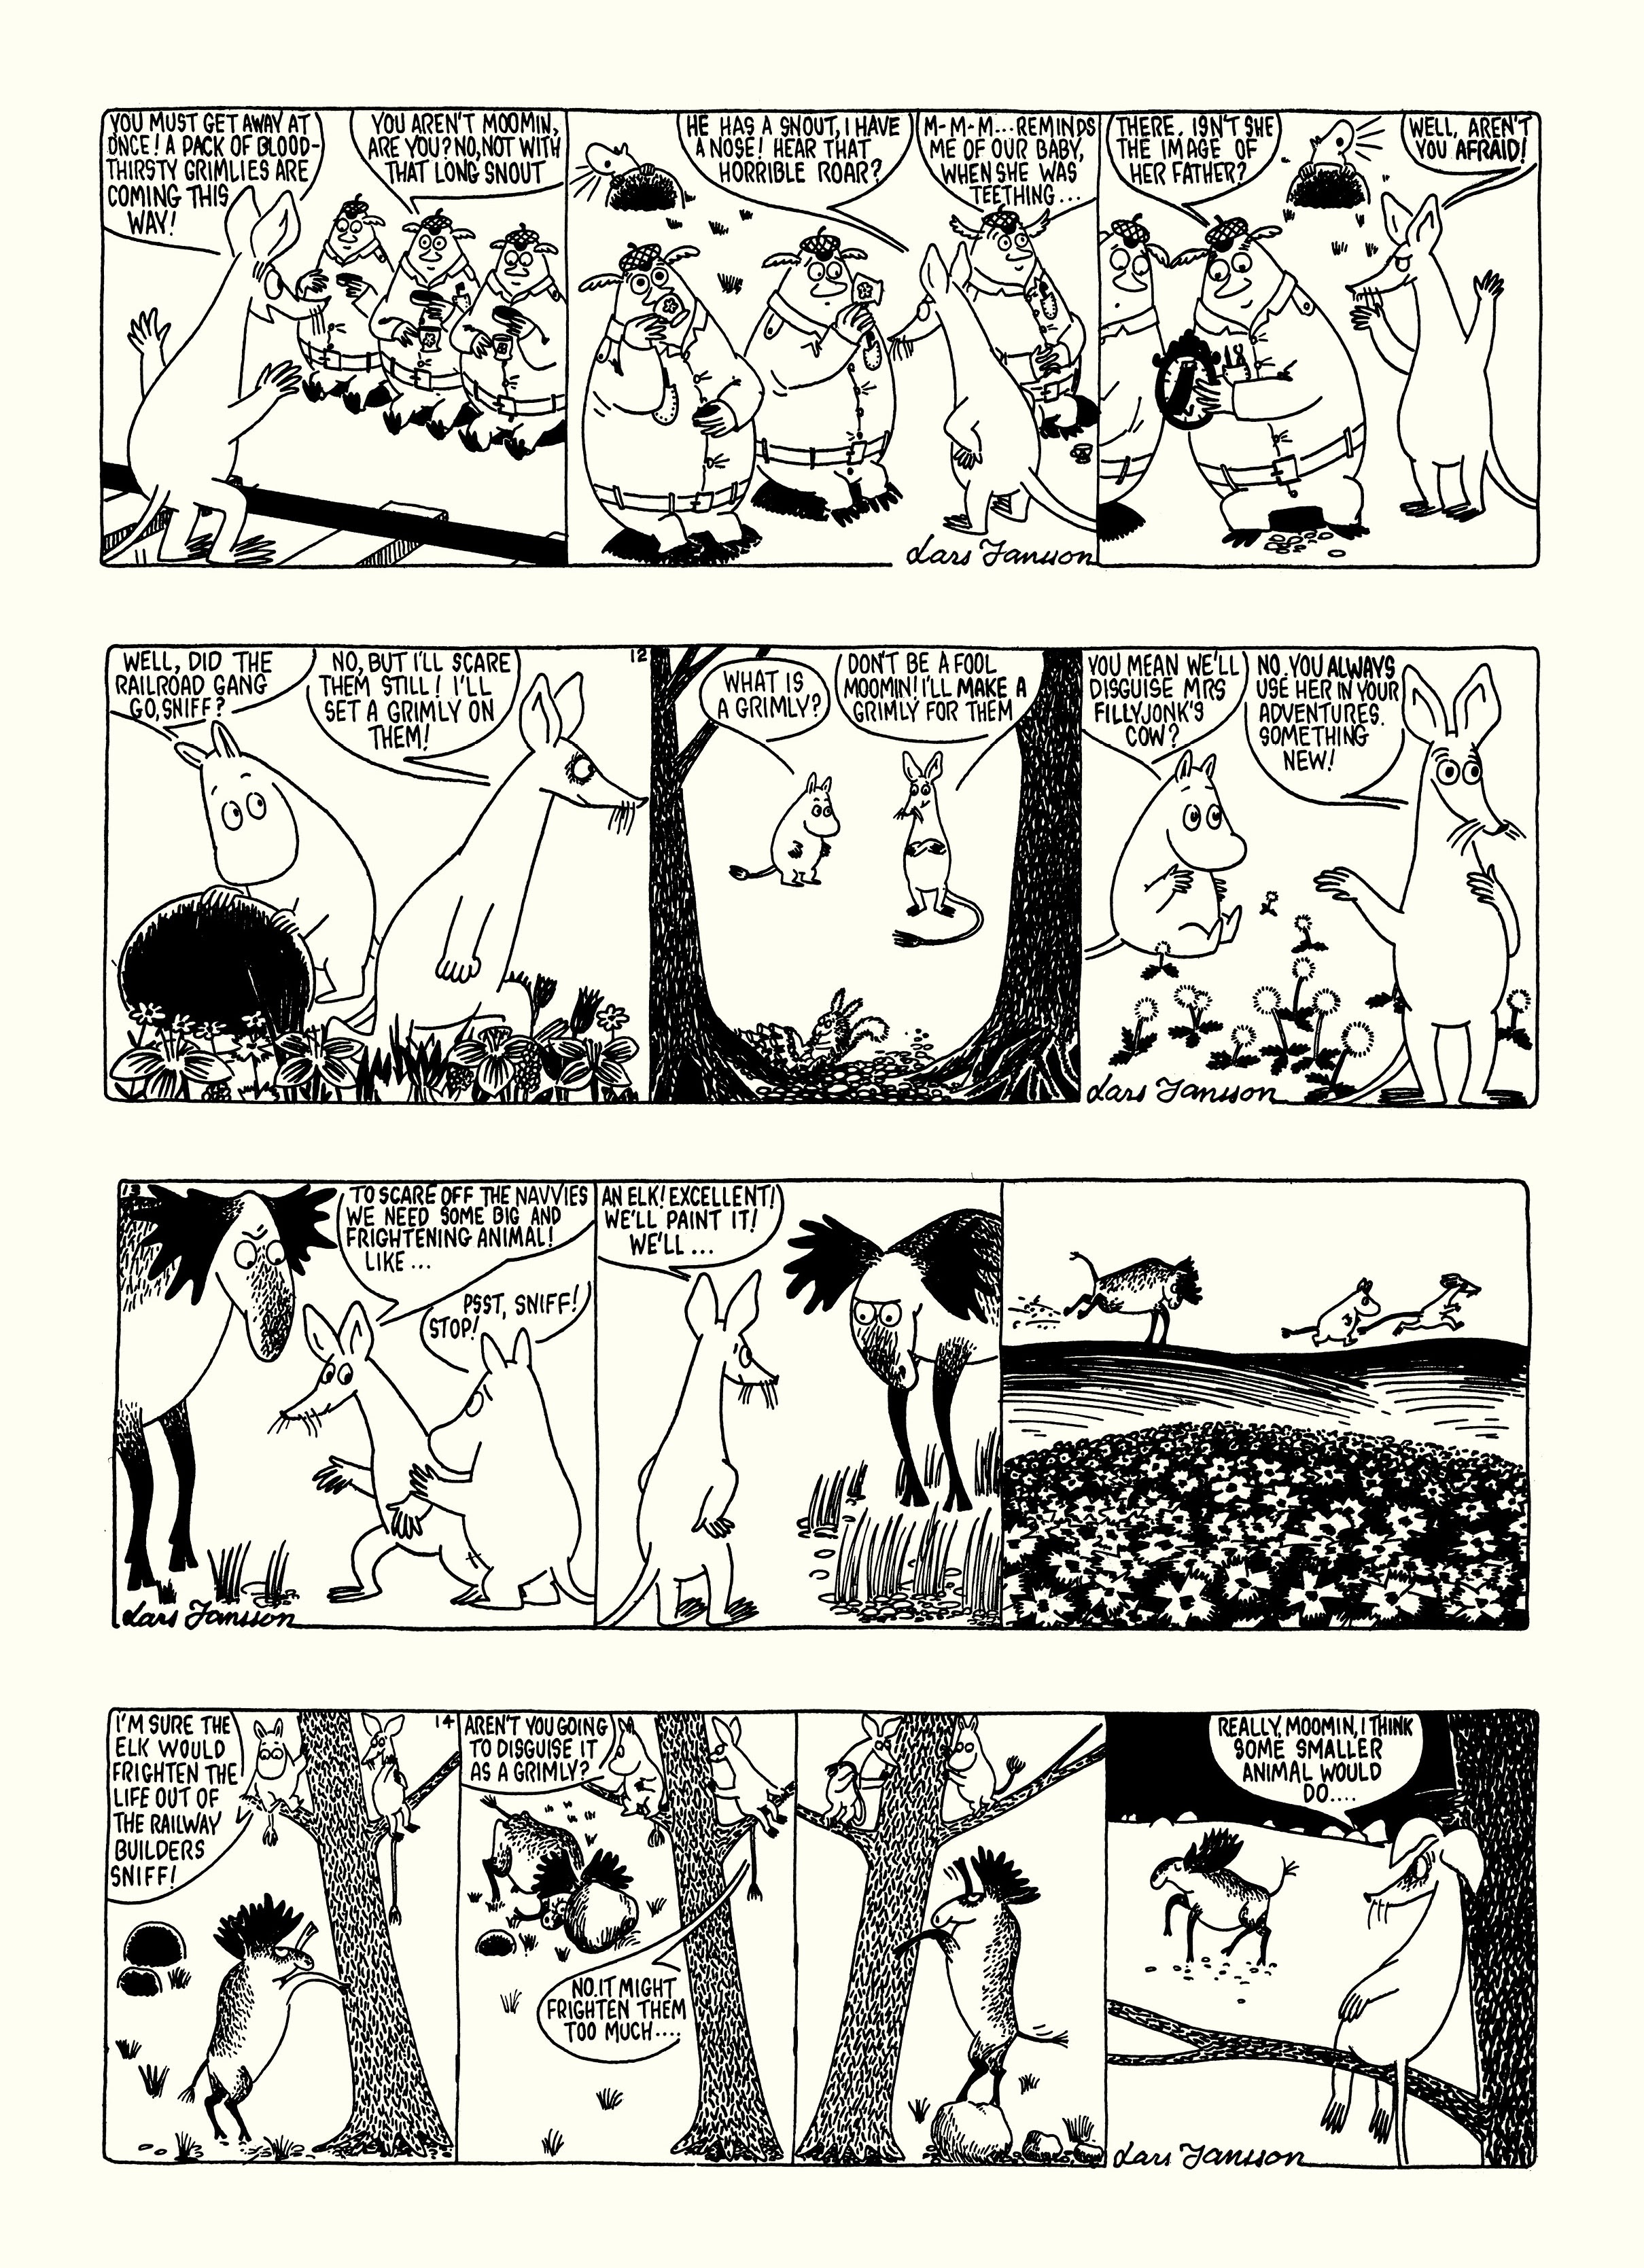 Read online Moomin: The Complete Lars Jansson Comic Strip comic -  Issue # TPB 6 - 29